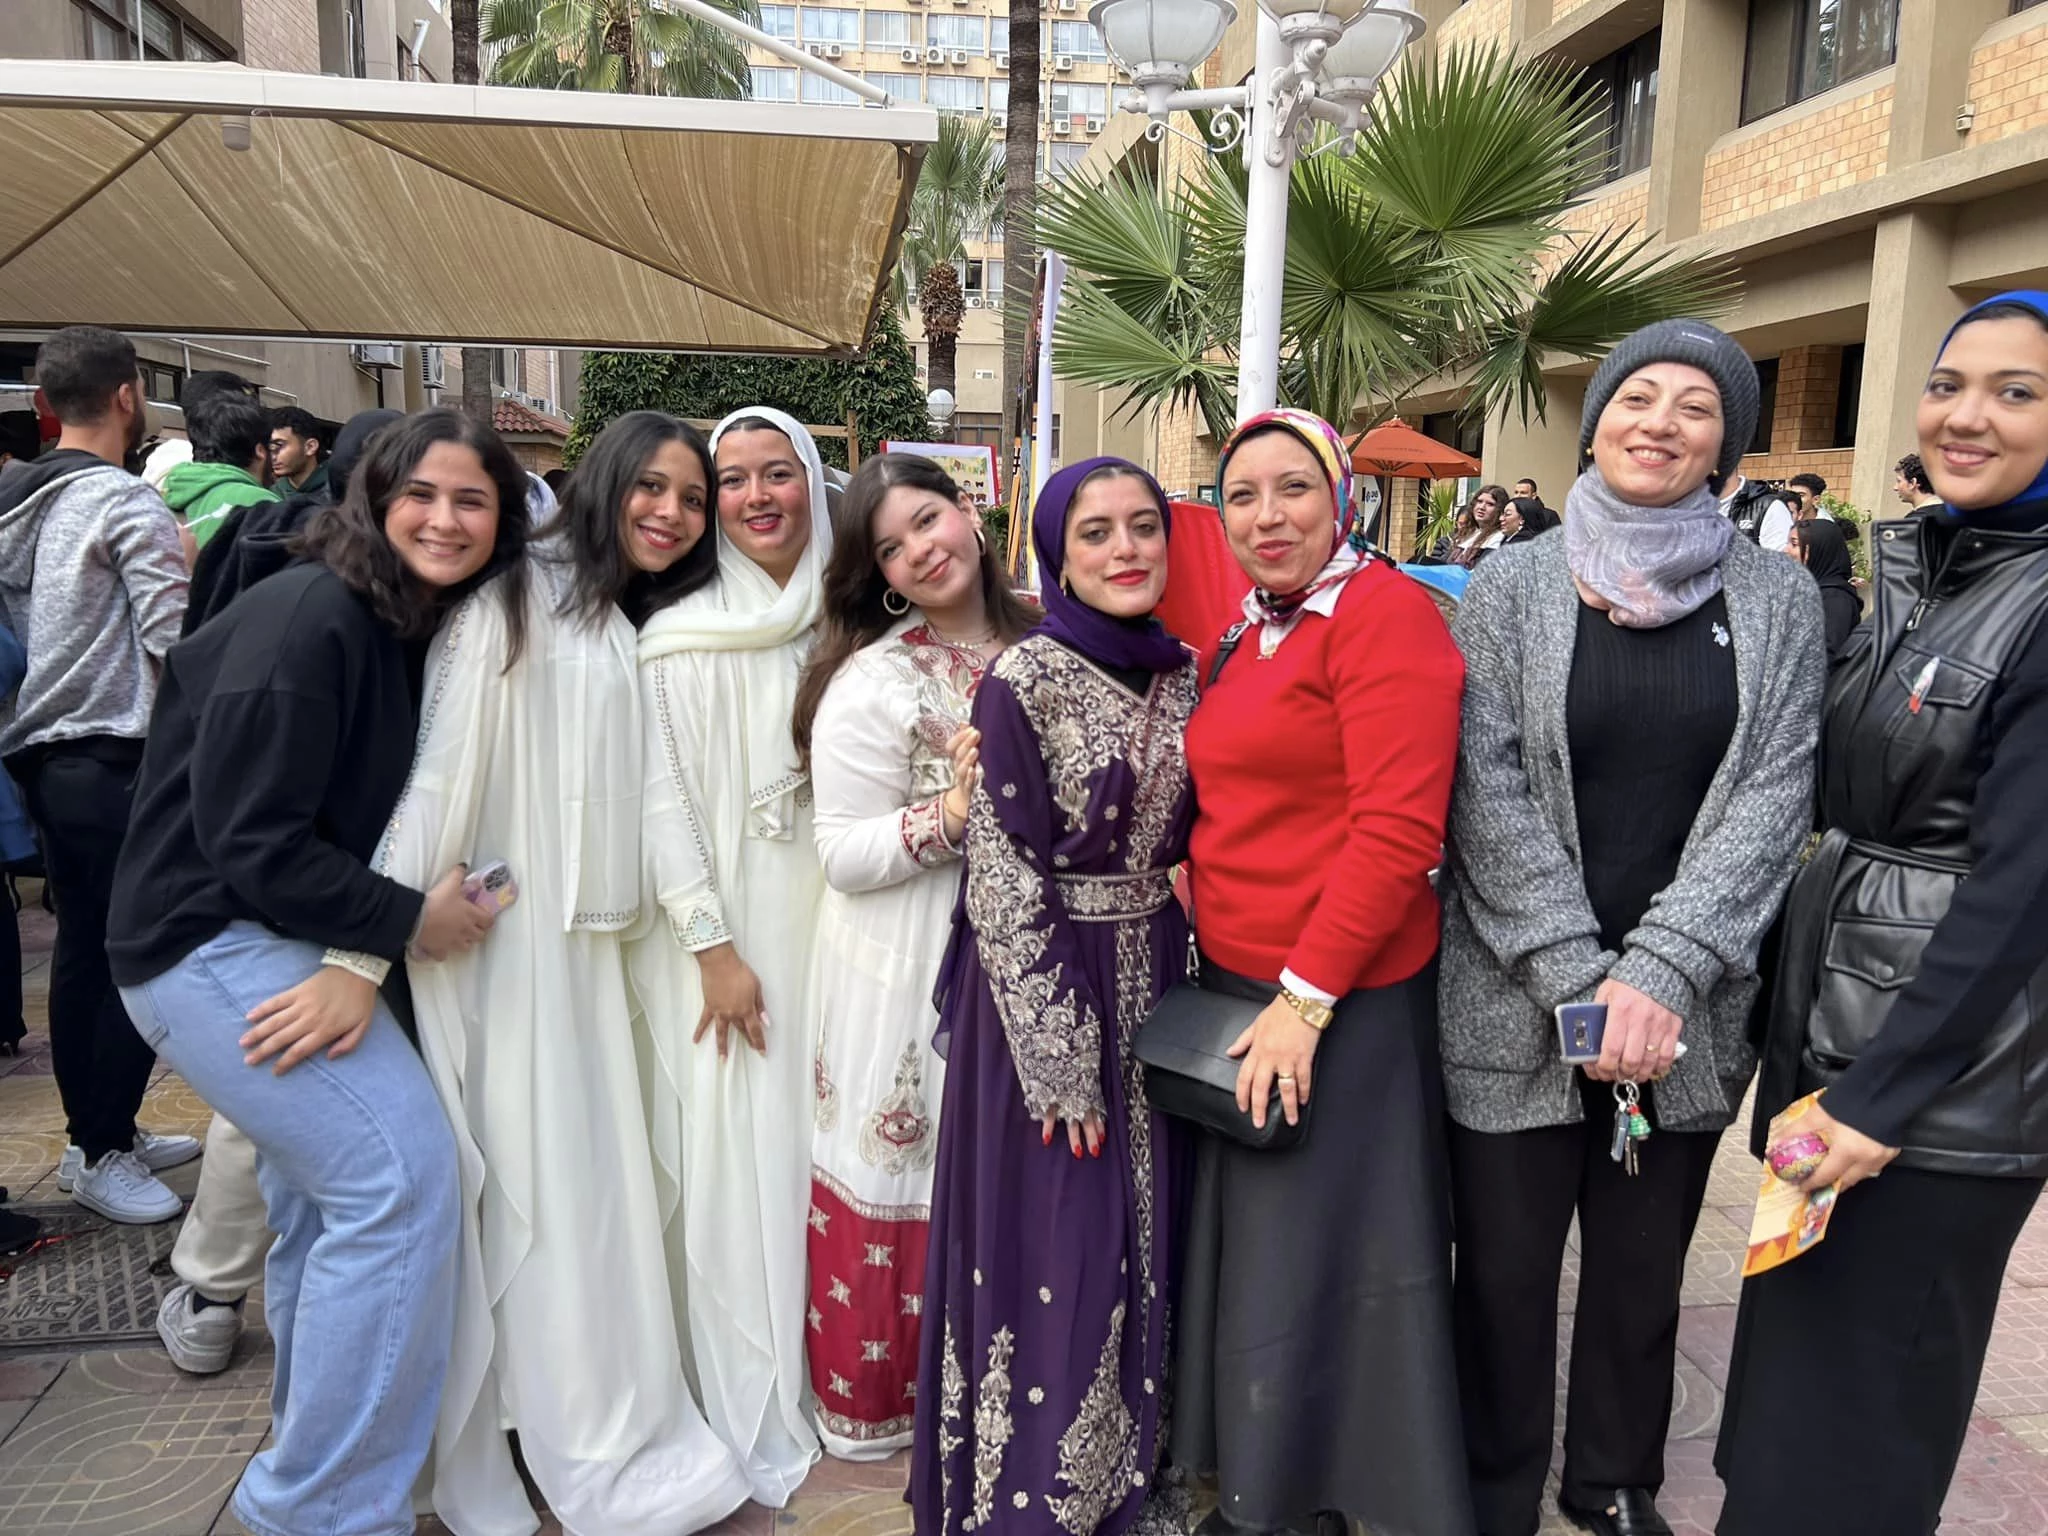 The Department of Cultural and Social Activities in Babi Qir organized an Intercultural Day for students of the College of Language and Media, including performances from various countries about the years of struggle of those peoples on: 12/25/20238